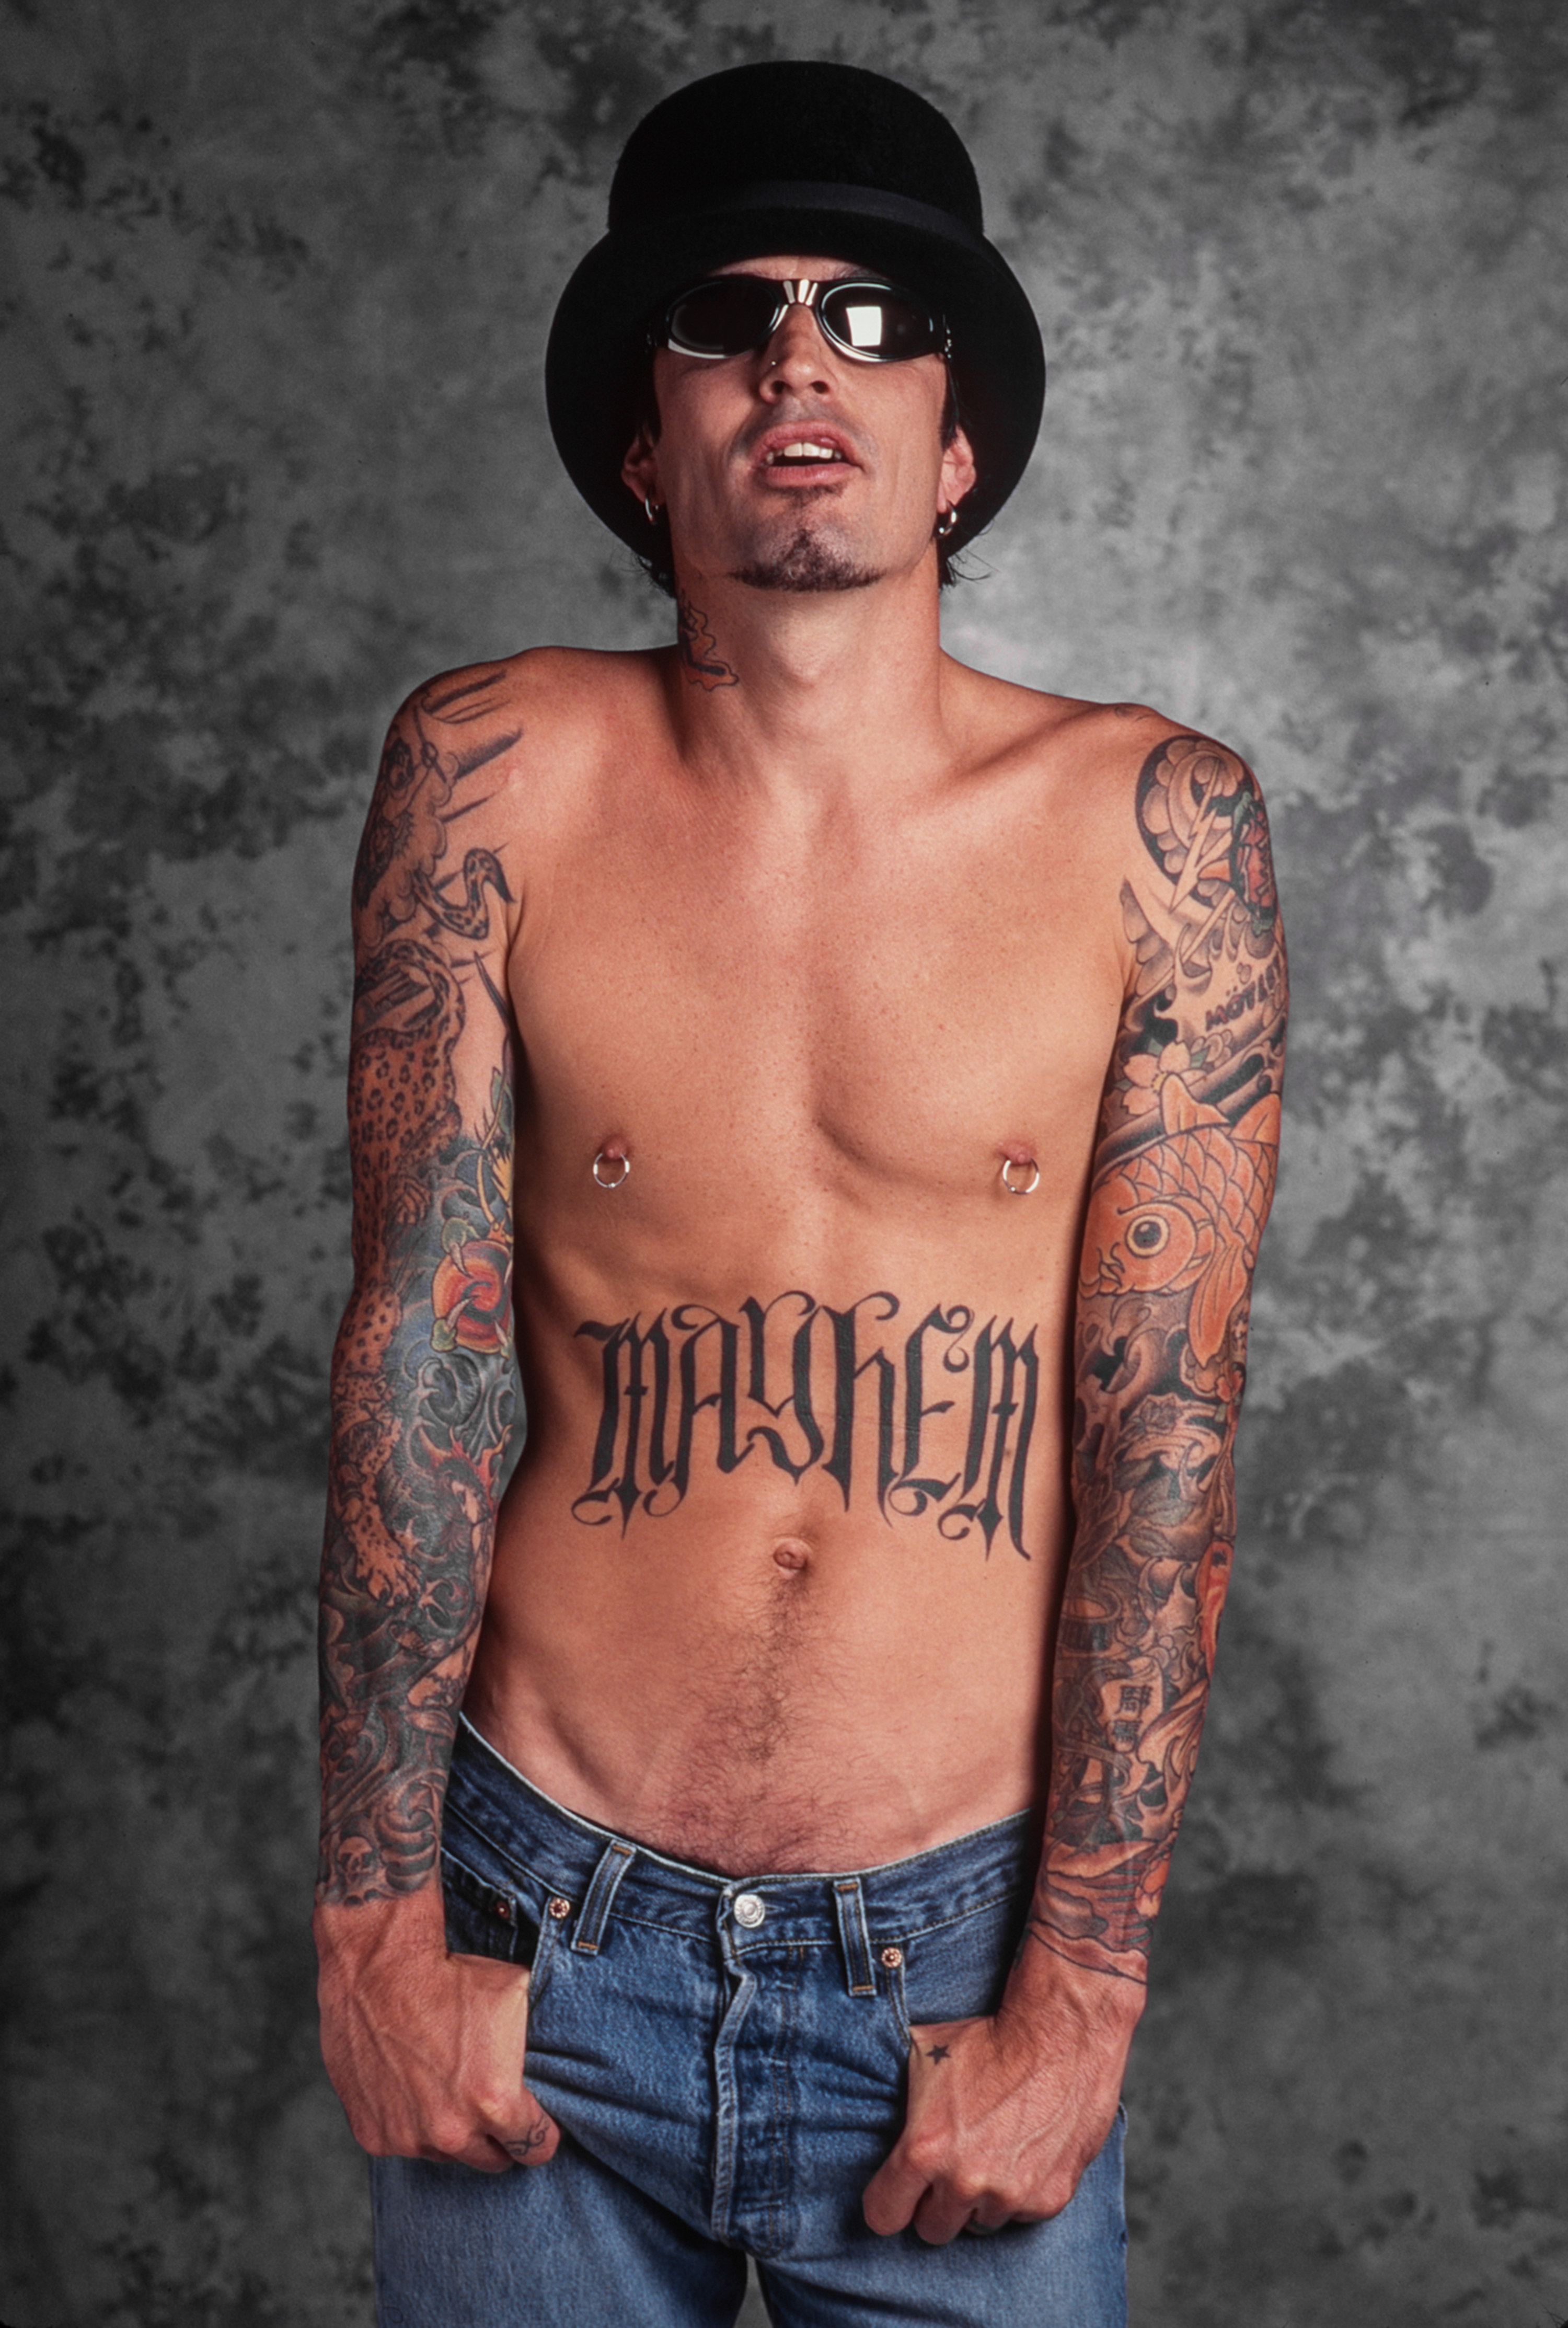 Tommy Lee's Nude Picture Compared With Britney Spears's Photos